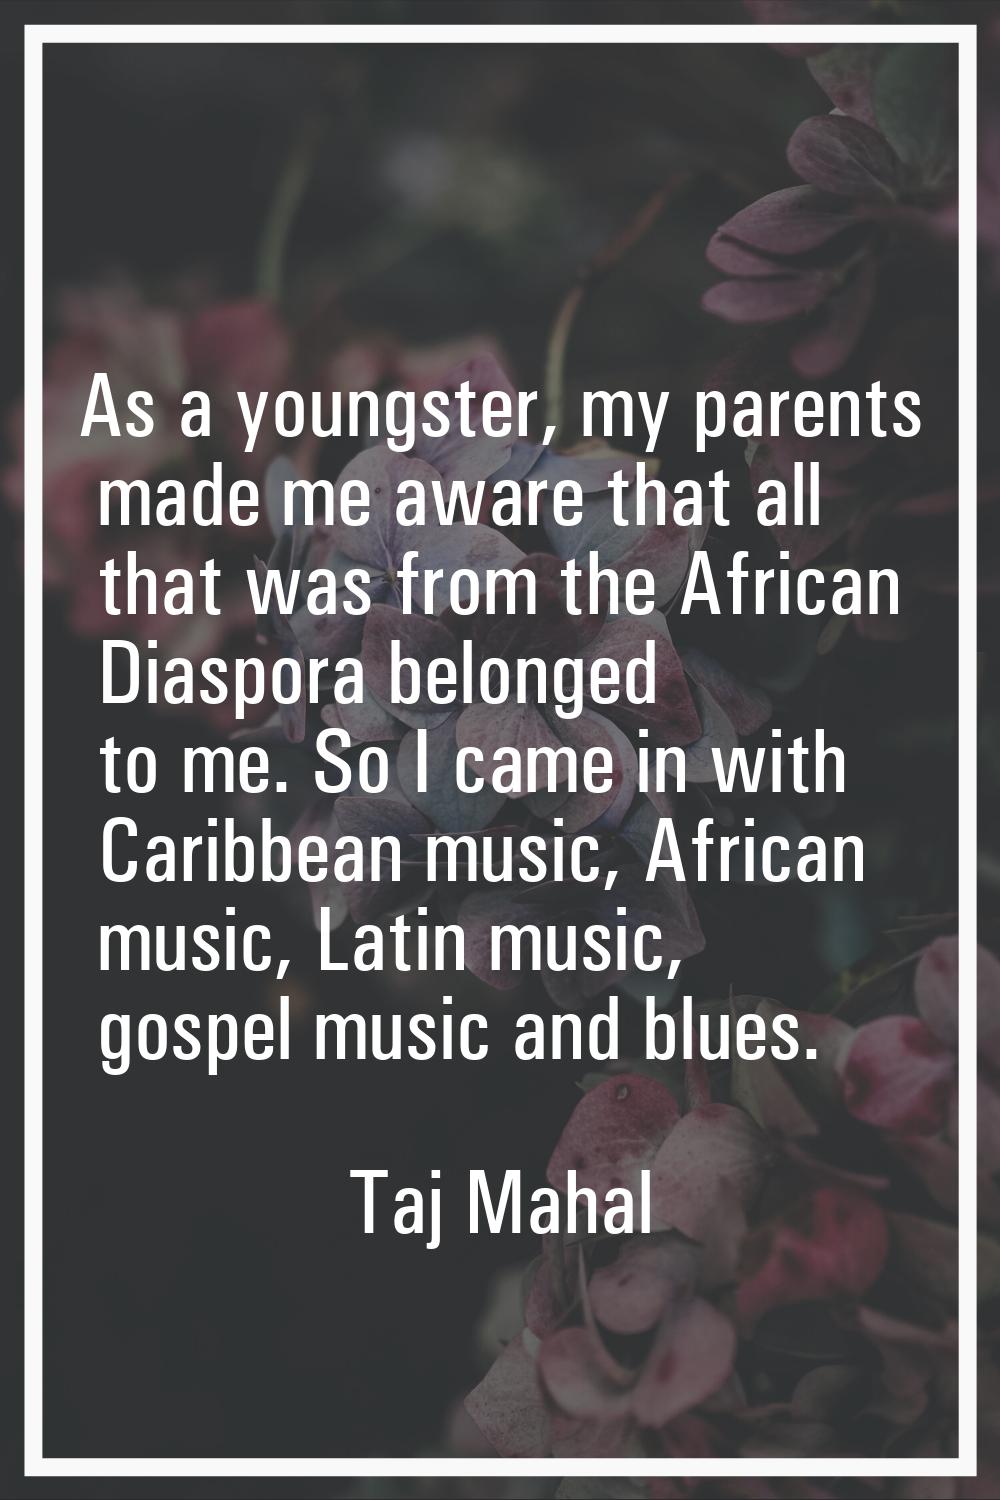 As a youngster, my parents made me aware that all that was from the African Diaspora belonged to me